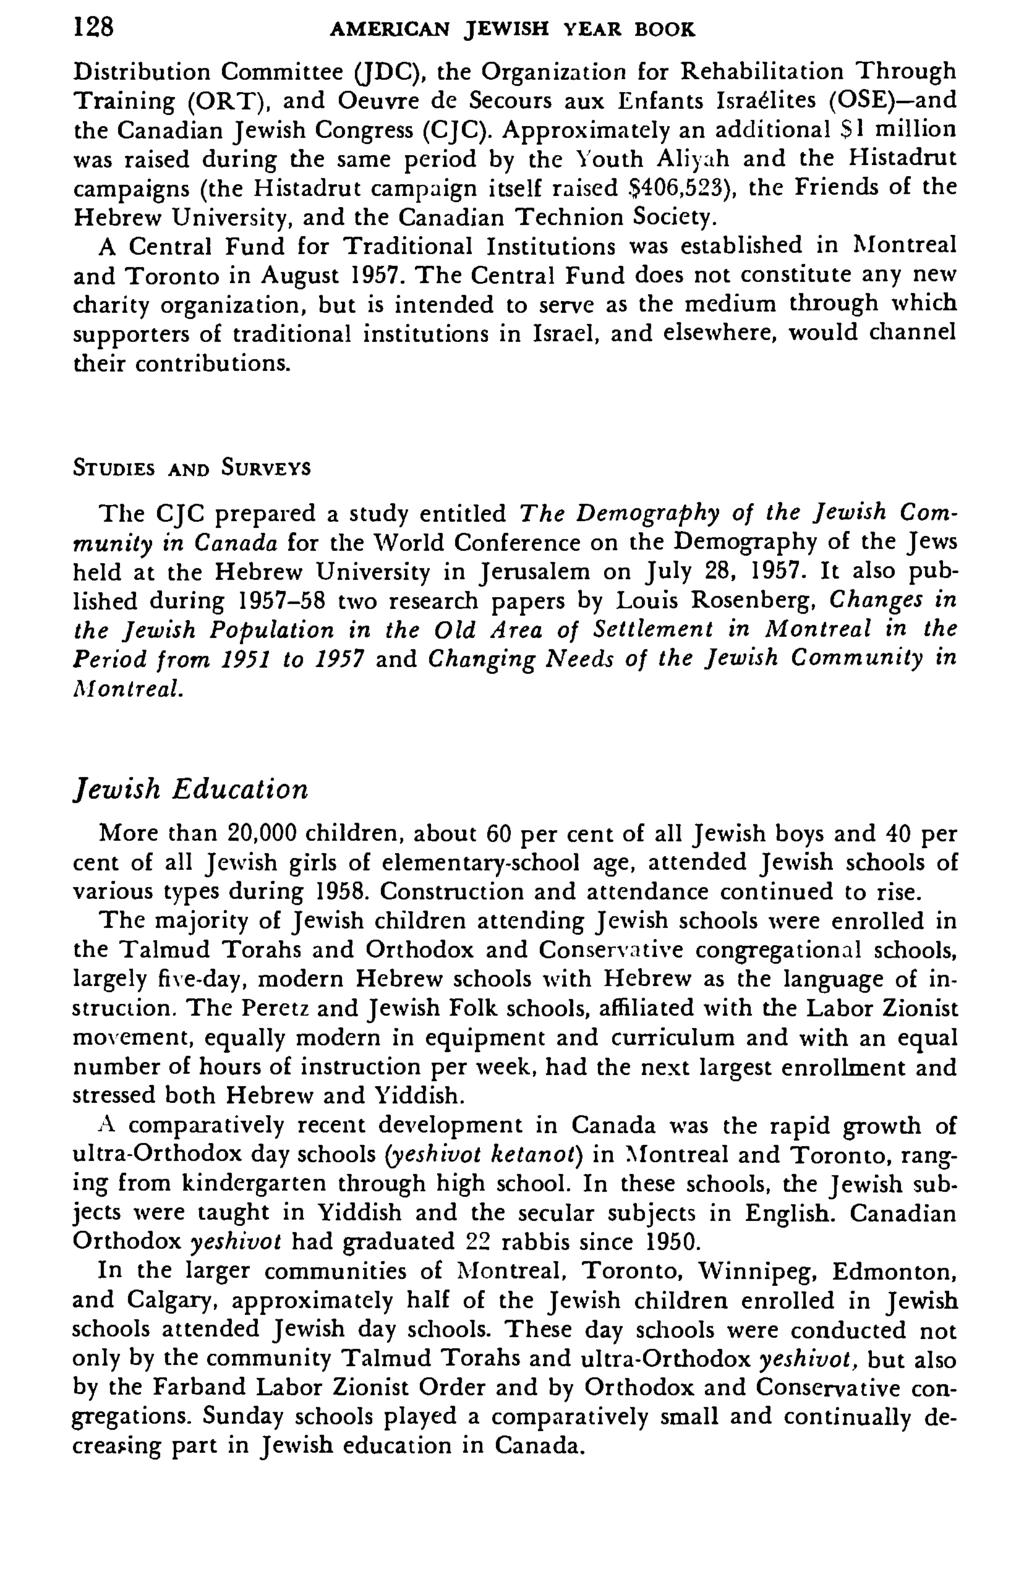 128 AMERICAN JEWISH YEAR BOOK Distribution Committee (JDC), the Organization for Rehabilitation Through Training (ORT), and Oeuvre de Secours aux Enfants Israelites (OSE) and the Canadian Jewish